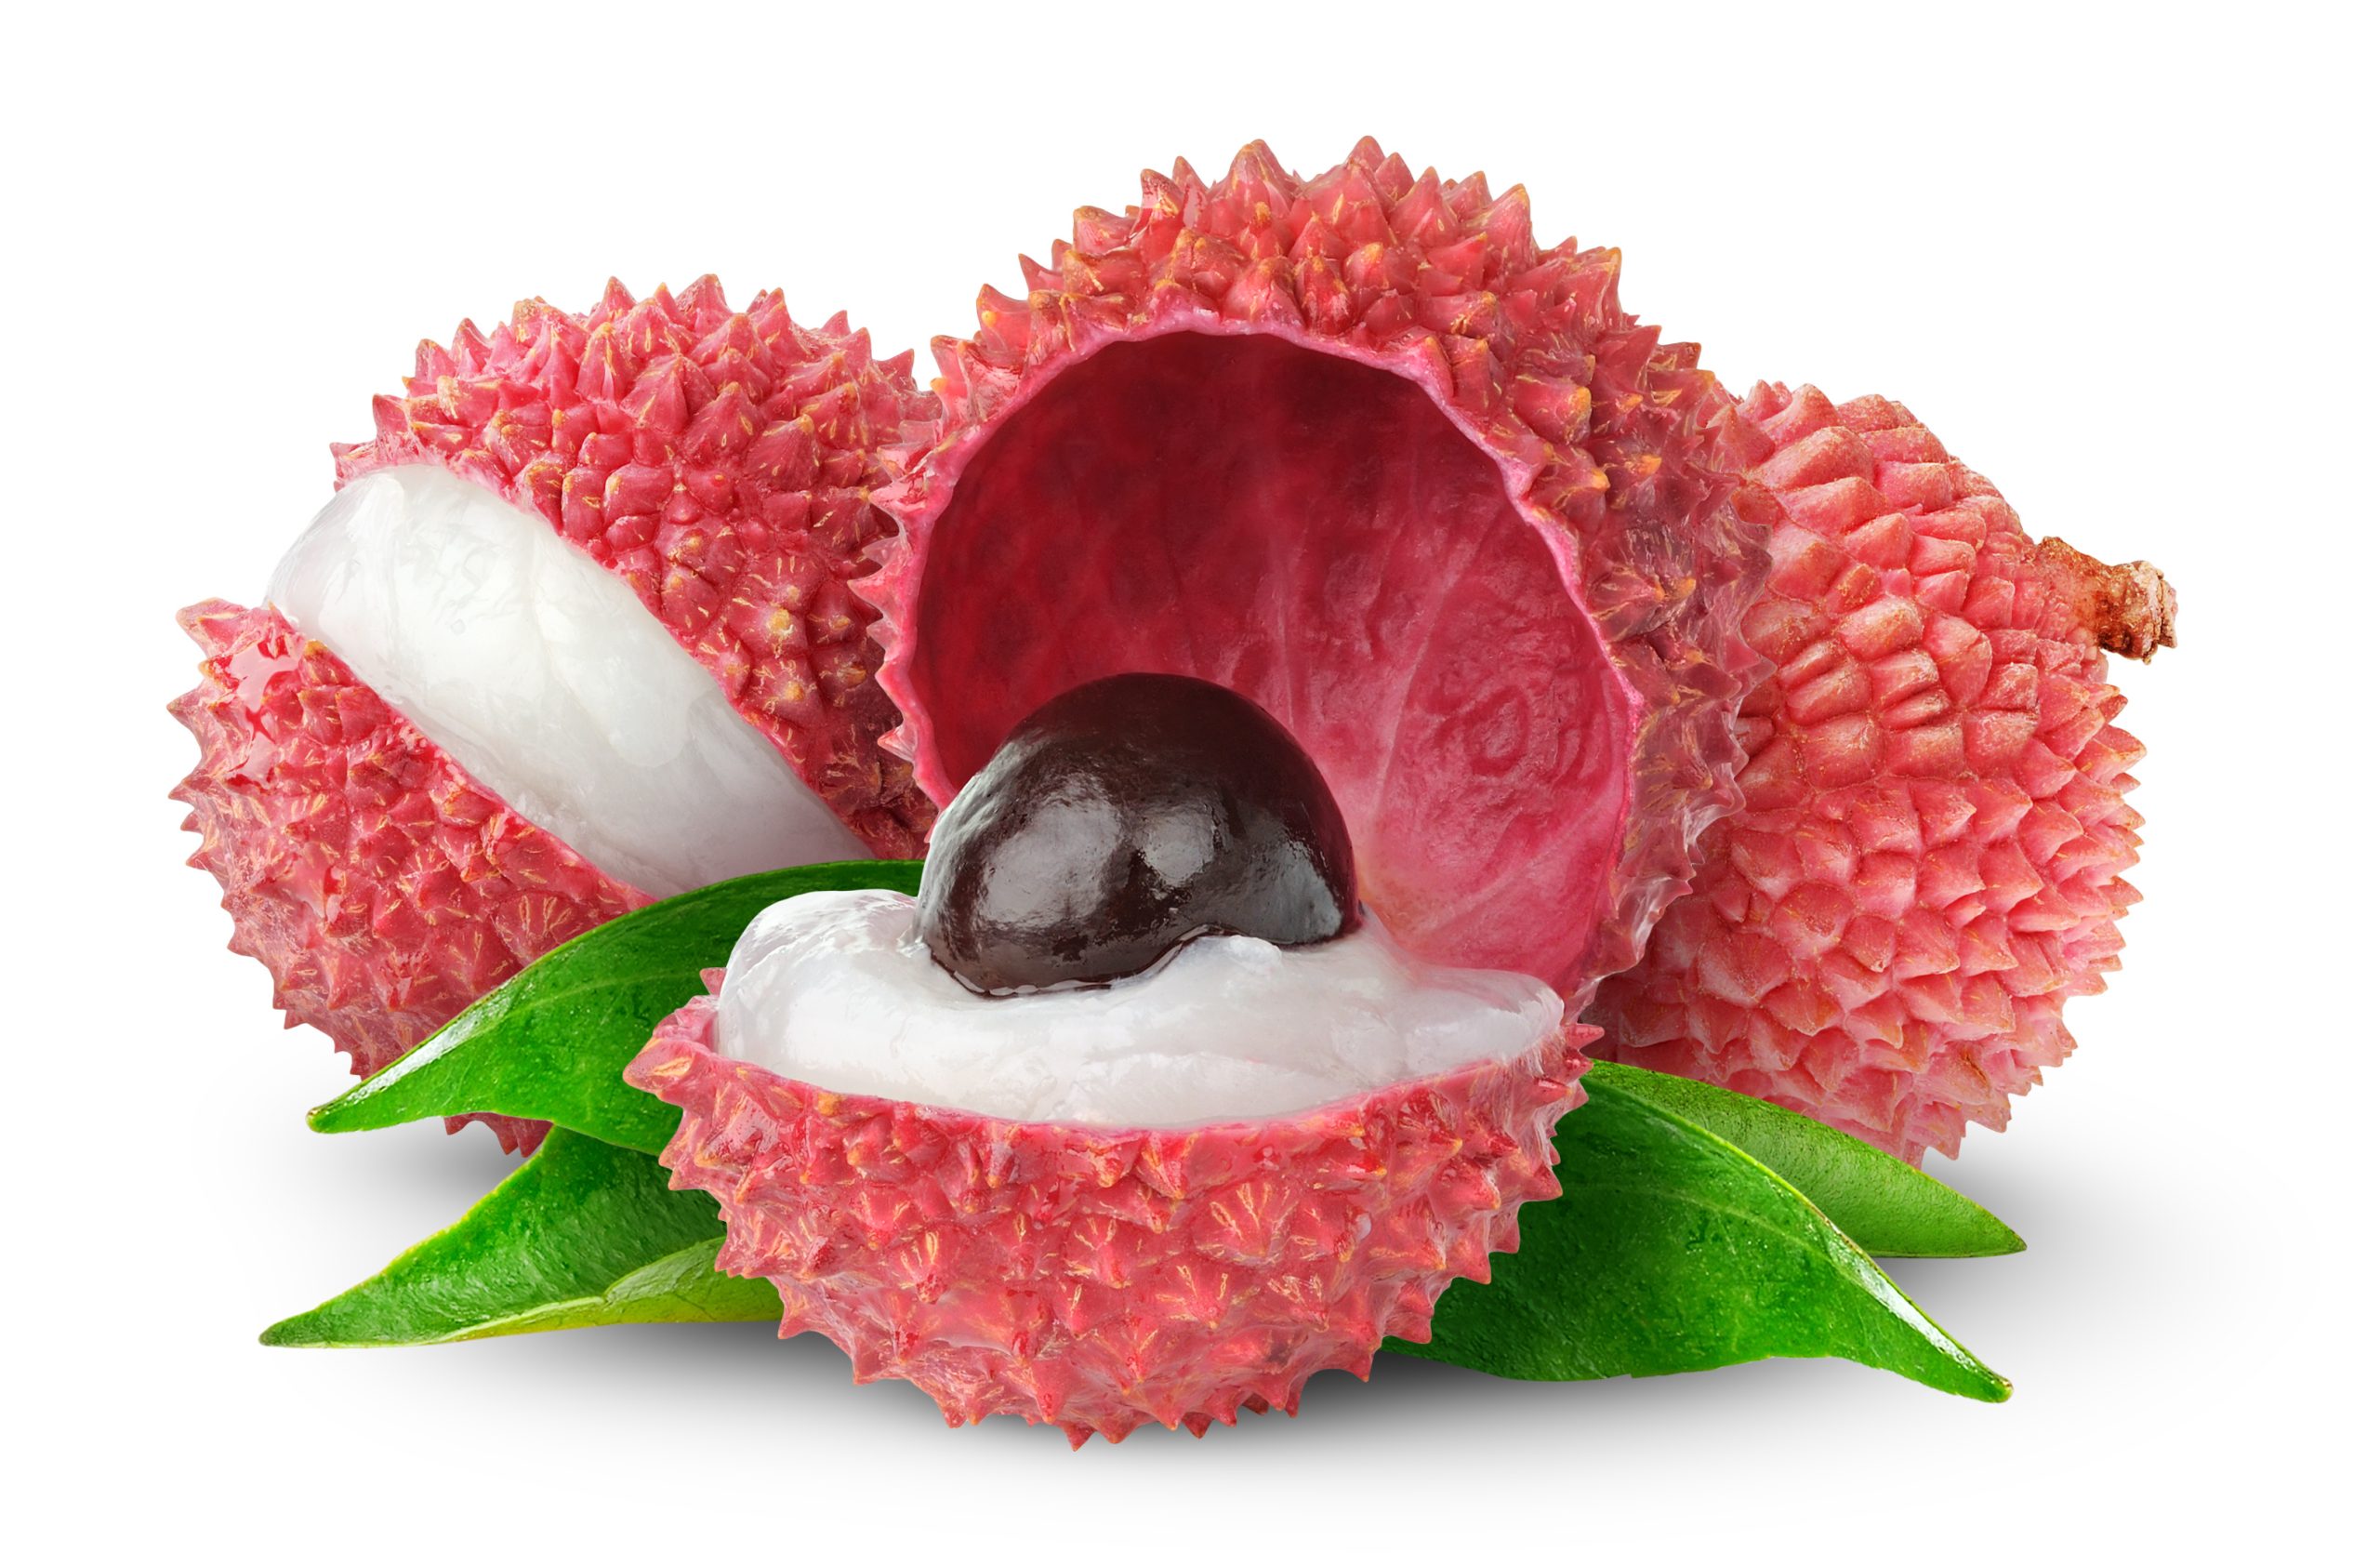 Litchi nut foods that start with L